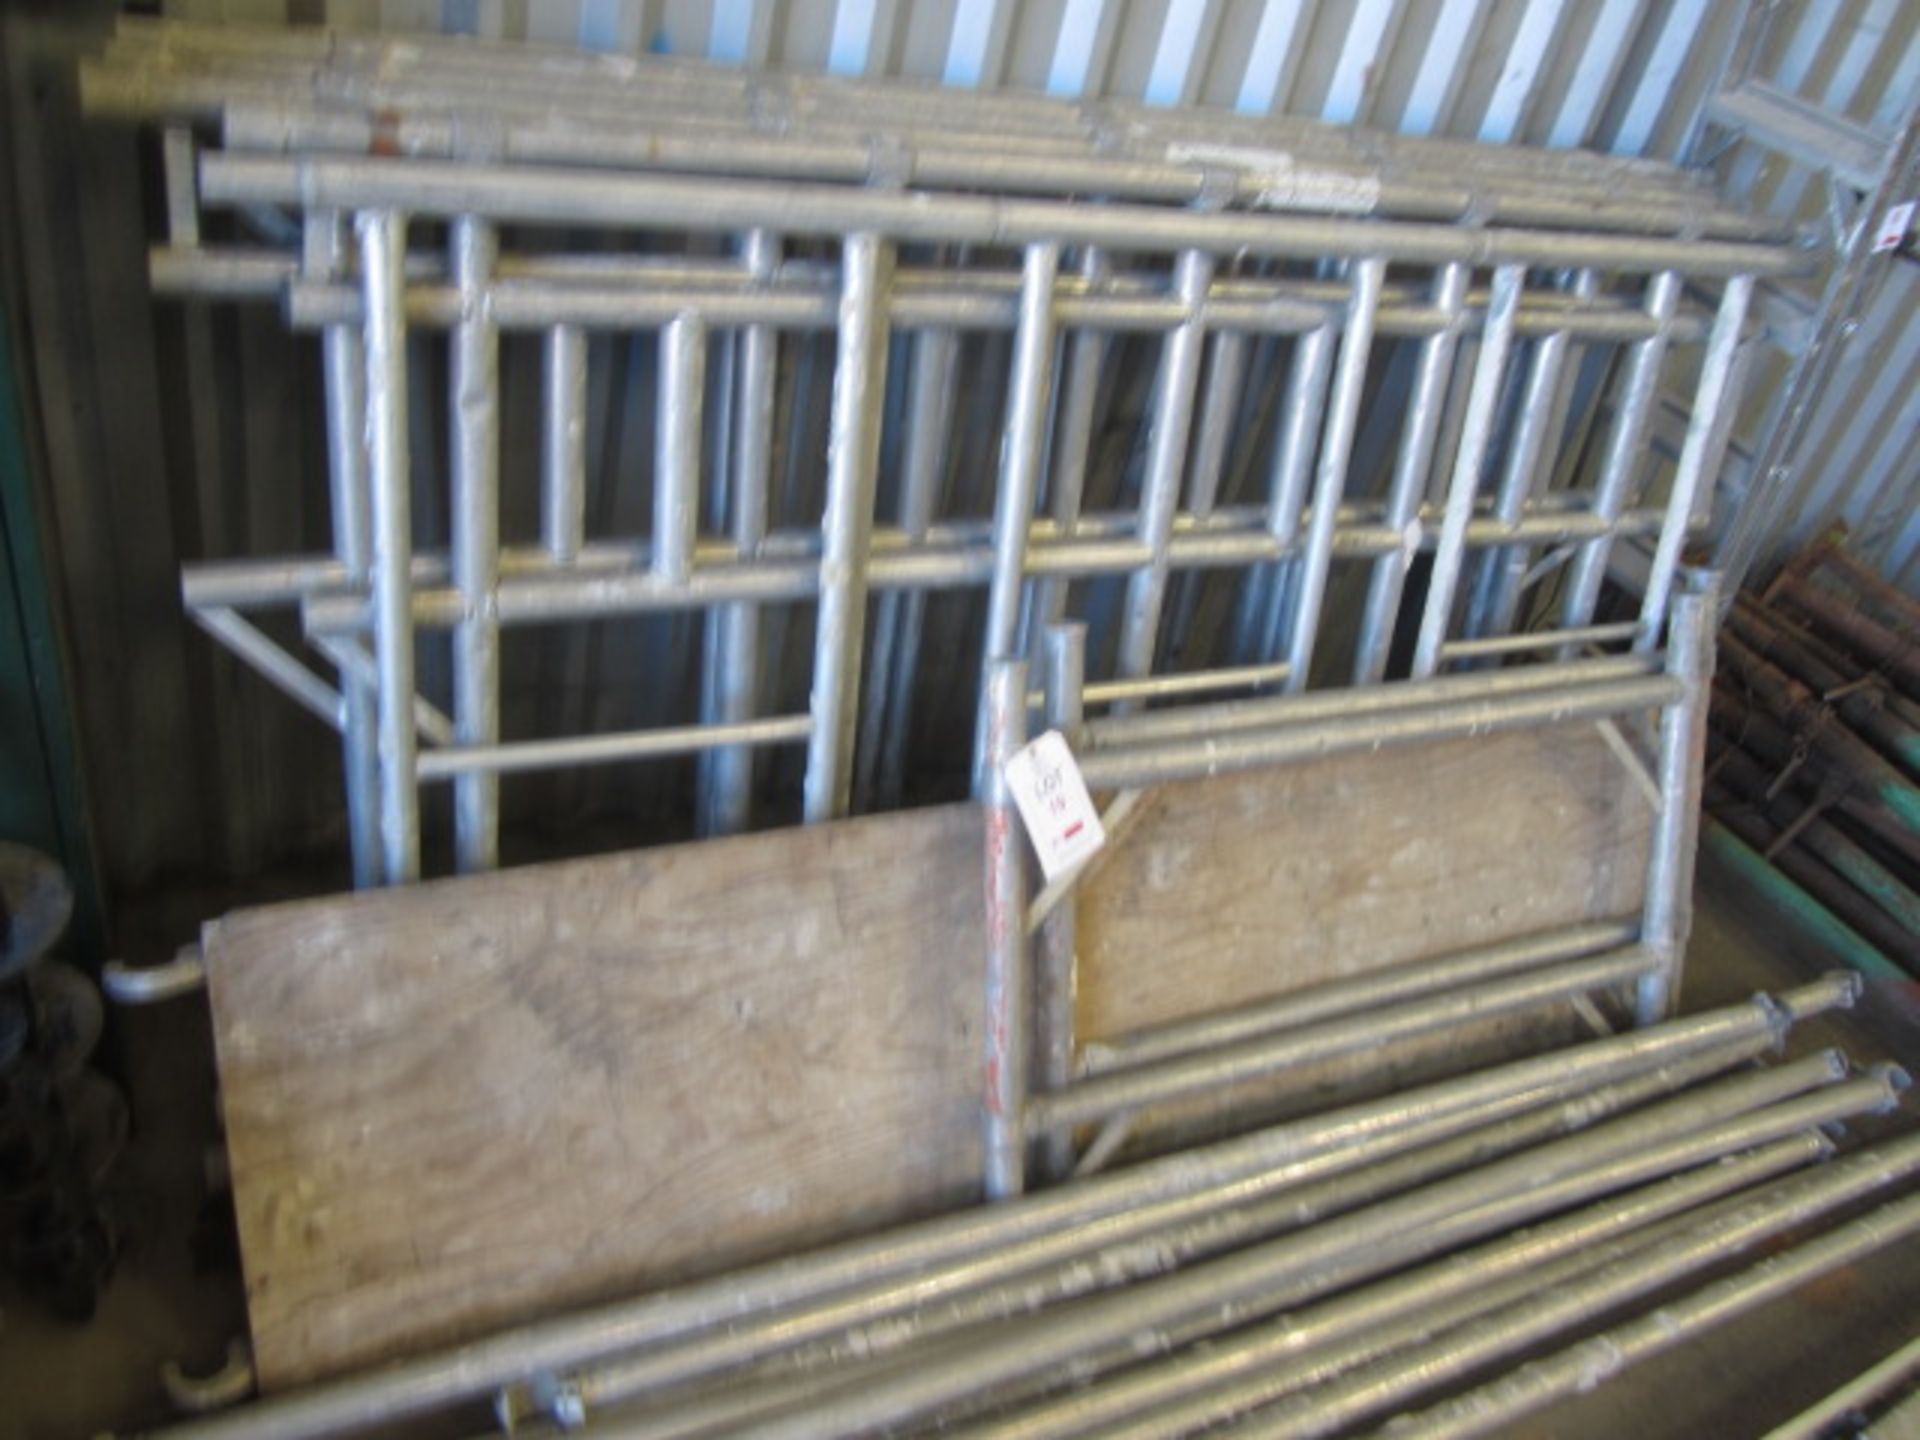 Aluminium tower scaffolding comprising of sides, board, cross beams - Image 6 of 6